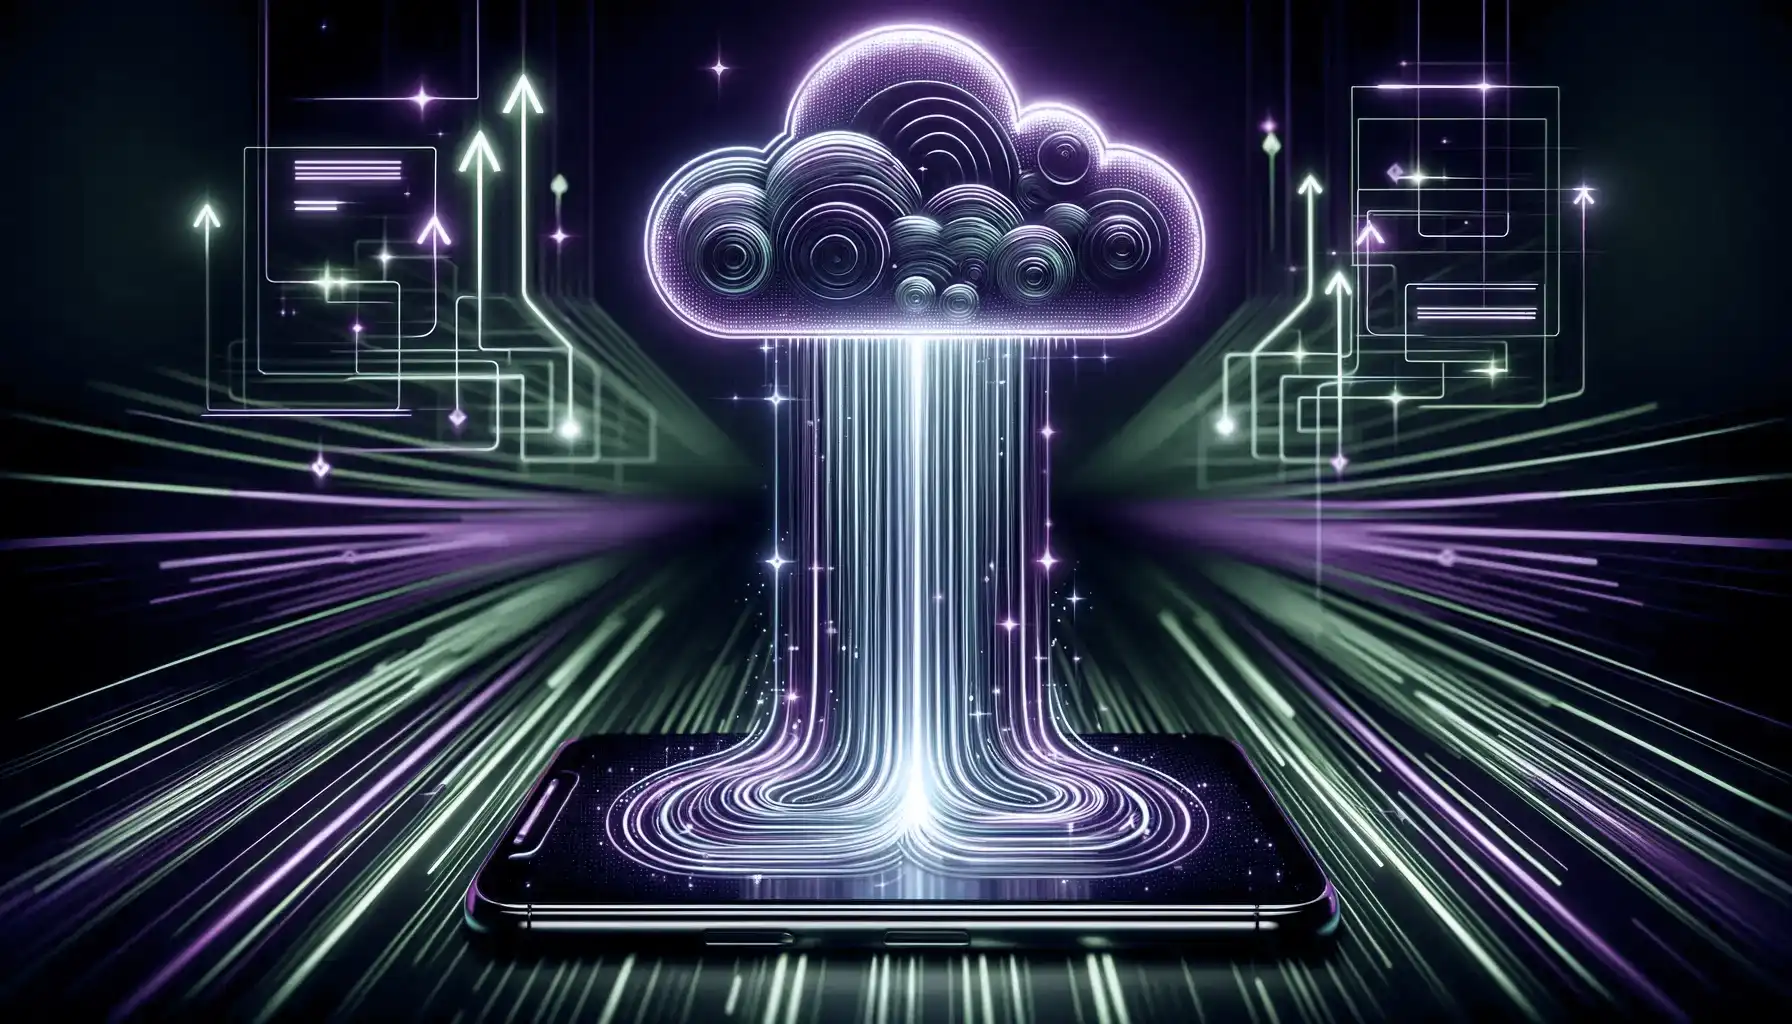 This 16x9 image vividly portrays the modernization of company applications, using a palette of purple and green neon lights. The focal point is a sleek, contemporary mobile device, from which streams of data and lines of code, depicted in bright neon colors, ascend towards a stylized cloud above. This imagery symbolizes the shift from traditional to cloud-based application solutions, embodying the concept of digital transformation and innovation in the business world. The background is abstract and technology-inspired, evoking a sense of a high-tech, digital environment. Overall, the image encapsulates the idea of technological progression and the move towards more efficient, cloud-enabled applications in modern business operations.